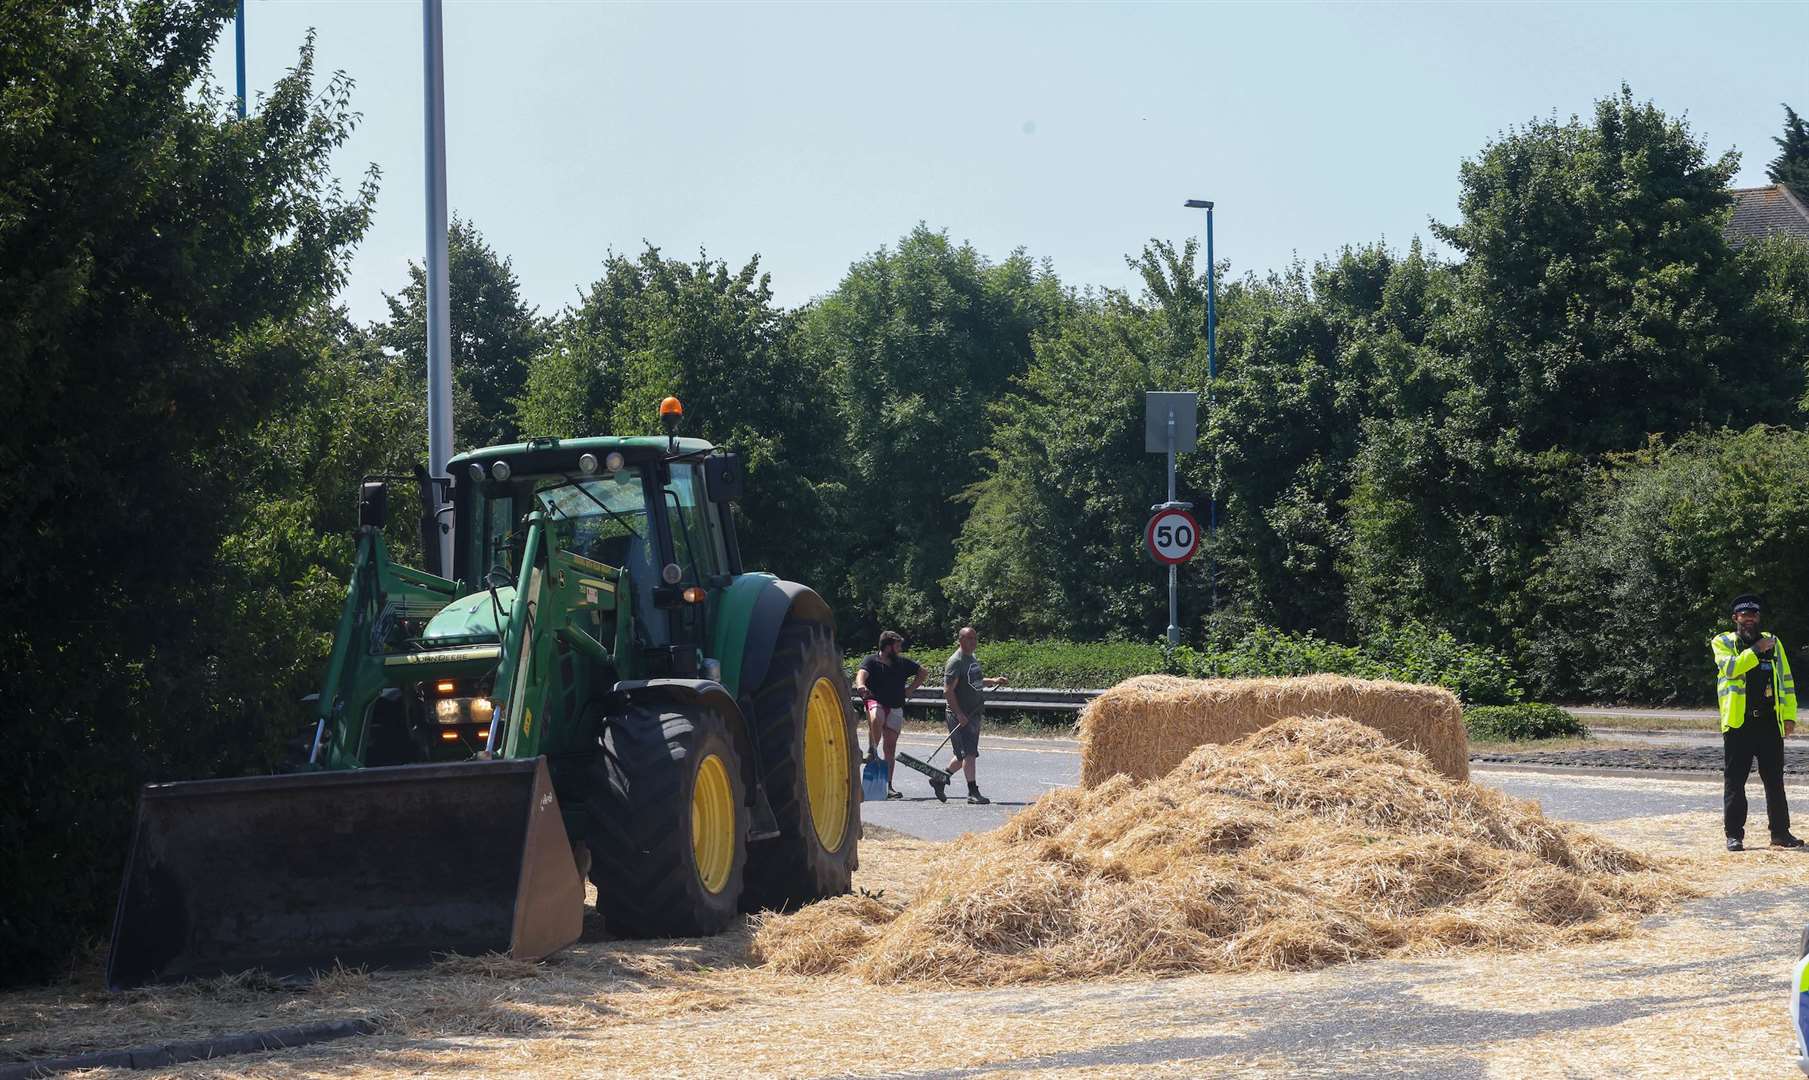 Grange Roundabout in Gillingham was closed due to a fallen load of hay. Images UKNIP